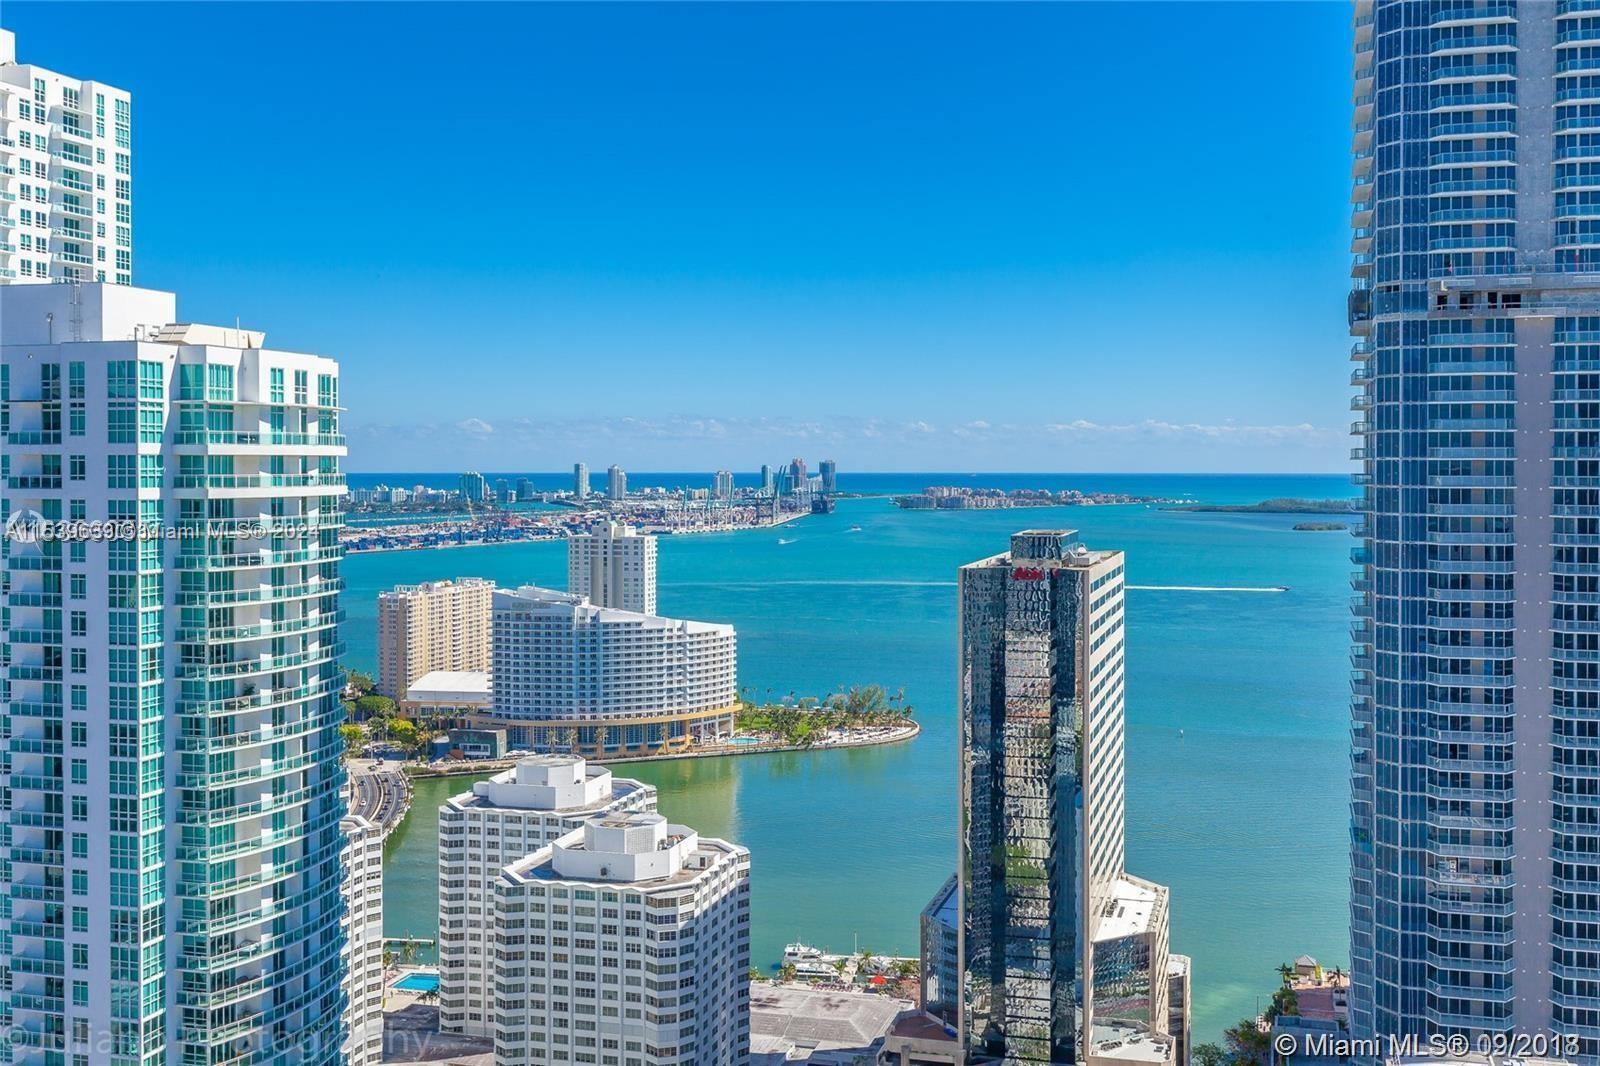 Private elevator leads you to this fabulous East facing unit at the new 1010 Brickell. 2BR + Enclosed Den converted to 3rd BR/3BA. Floor-to-ceiling windows throughout. Expansive private balcony with direct views of Biscayne Bay & South Beach. European-inspired kitchen cabinetry. Washer & dryer. Automatic Blackout and Sheer shades. Unparalleled amenities for every member of the family. Enjoy a state-of-the-art outdoor theater or indulge in the trendy food & drink menus with 5 star services at The Treetop Lounge. Residents can enjoy the rooftop pool deck or the indoor pool at The Club at 1010 surrounded by retractable glass walls. Co-ed hammam Turkish steam bath area, saunas, Basketball & Racquet ball rooms, bowling and more! **2 PARKING SPACES & 1 STORAGE UNDER A/C**